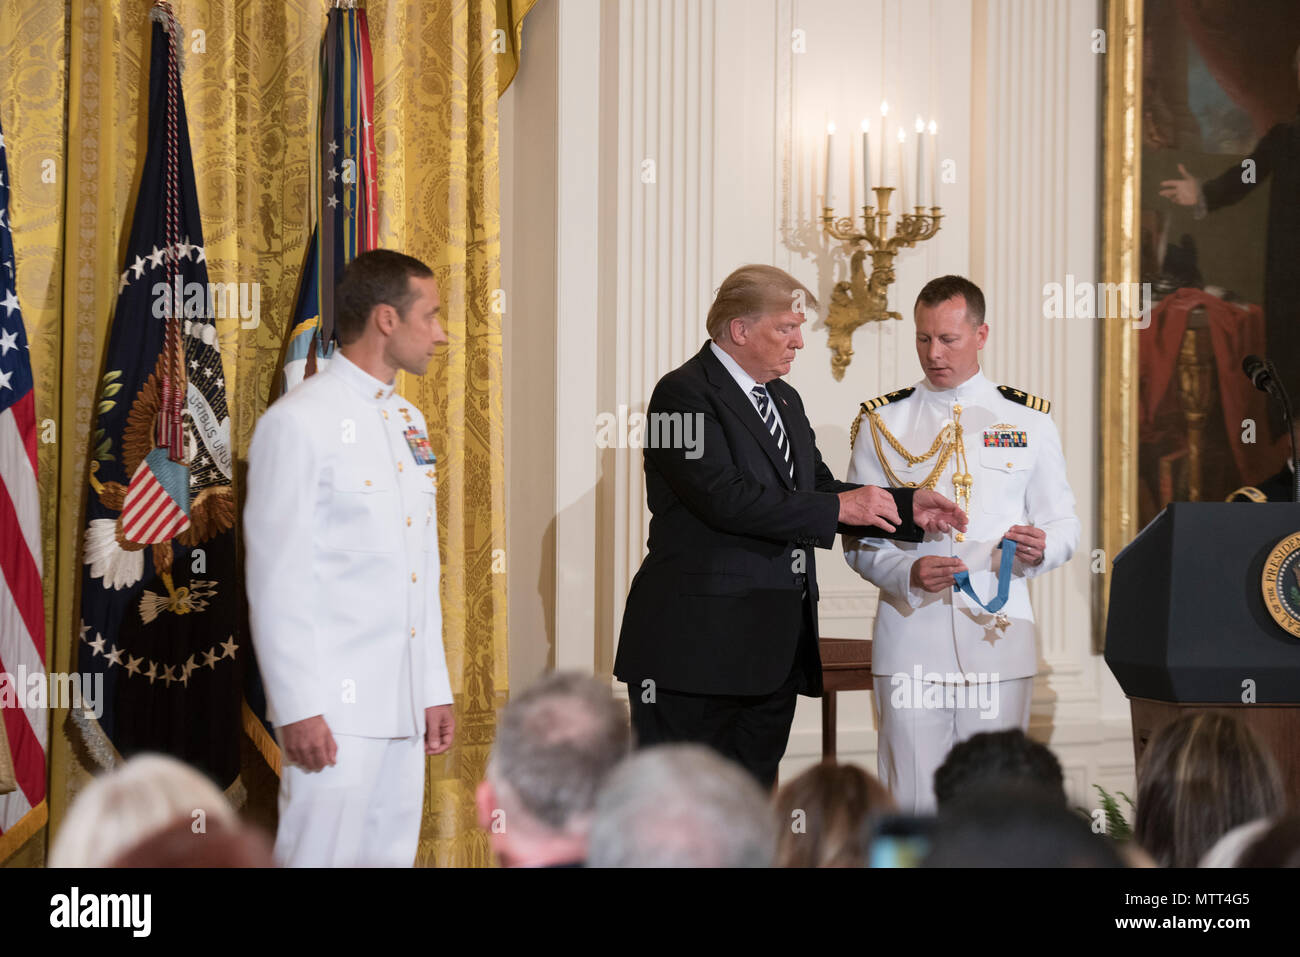 180524-N-BB269-007  WASHINGTON (May 24, 2018) President Donald J. Trump presents the Medal of Honor to retired Master Chief Special Warfare Operator (SEAL) Britt Slabinski during a ceremony at the White House in Washington, D.C. Slabinski received the Medal of Honor for his actions during Operation Anaconda in Afghanistan in March 2002. (U.S. Navy photo by Mass Communication Specialist 1st Class Raymond D. Diaz III/Released) Stock Photo